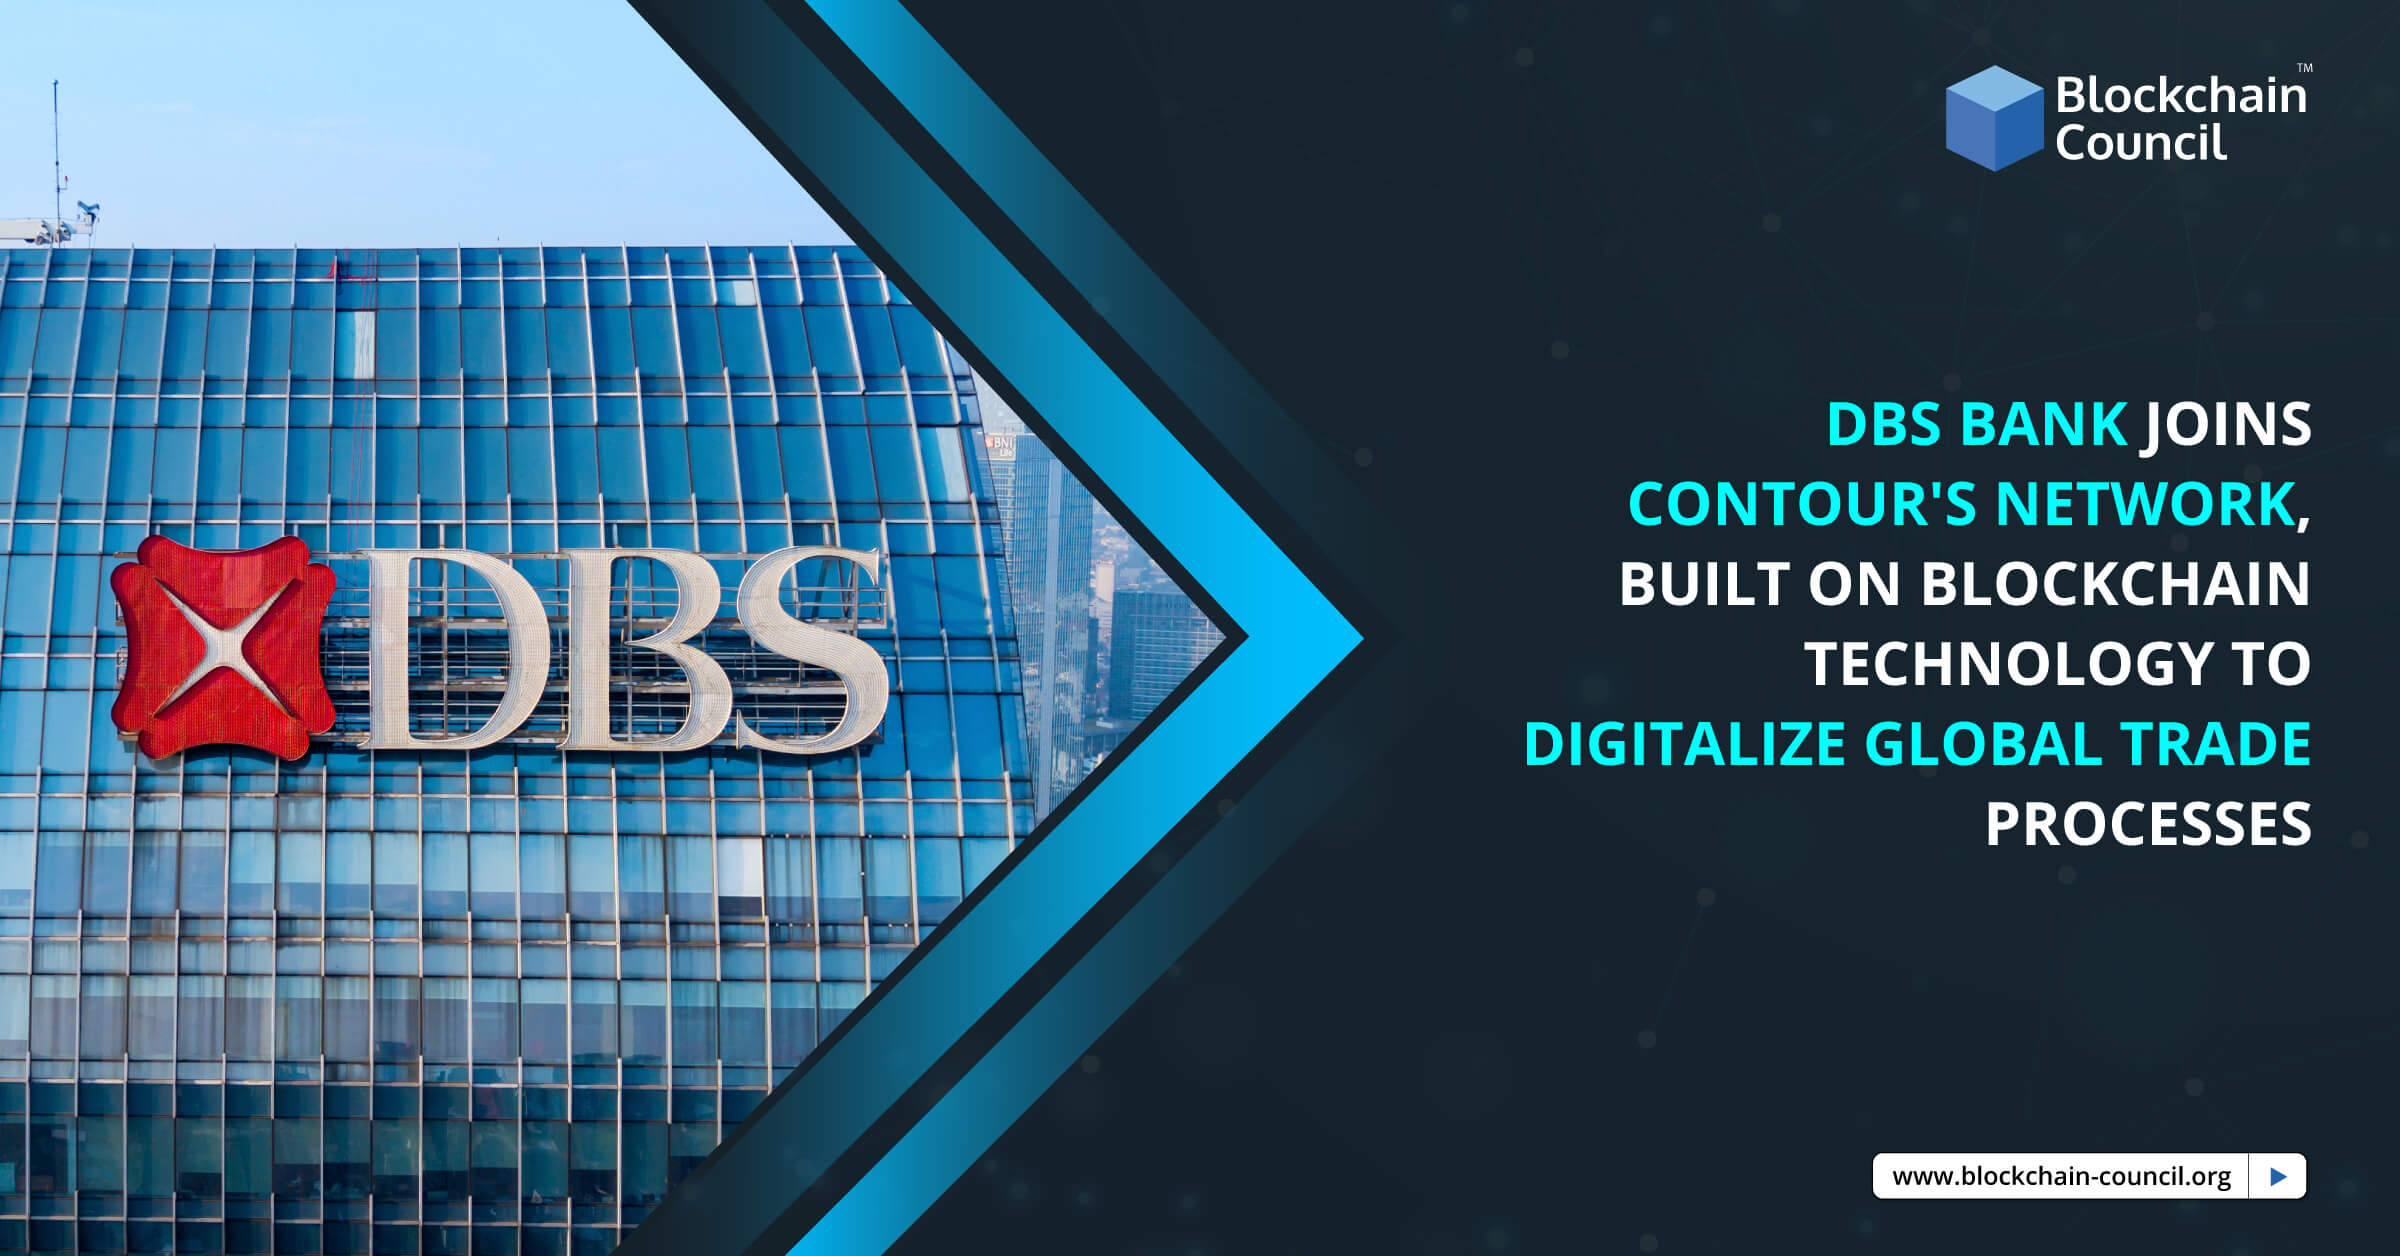 DBS Bank Joins Contour’s Network, Built on Blockchain Technology to Digitalize Global Trade Processes